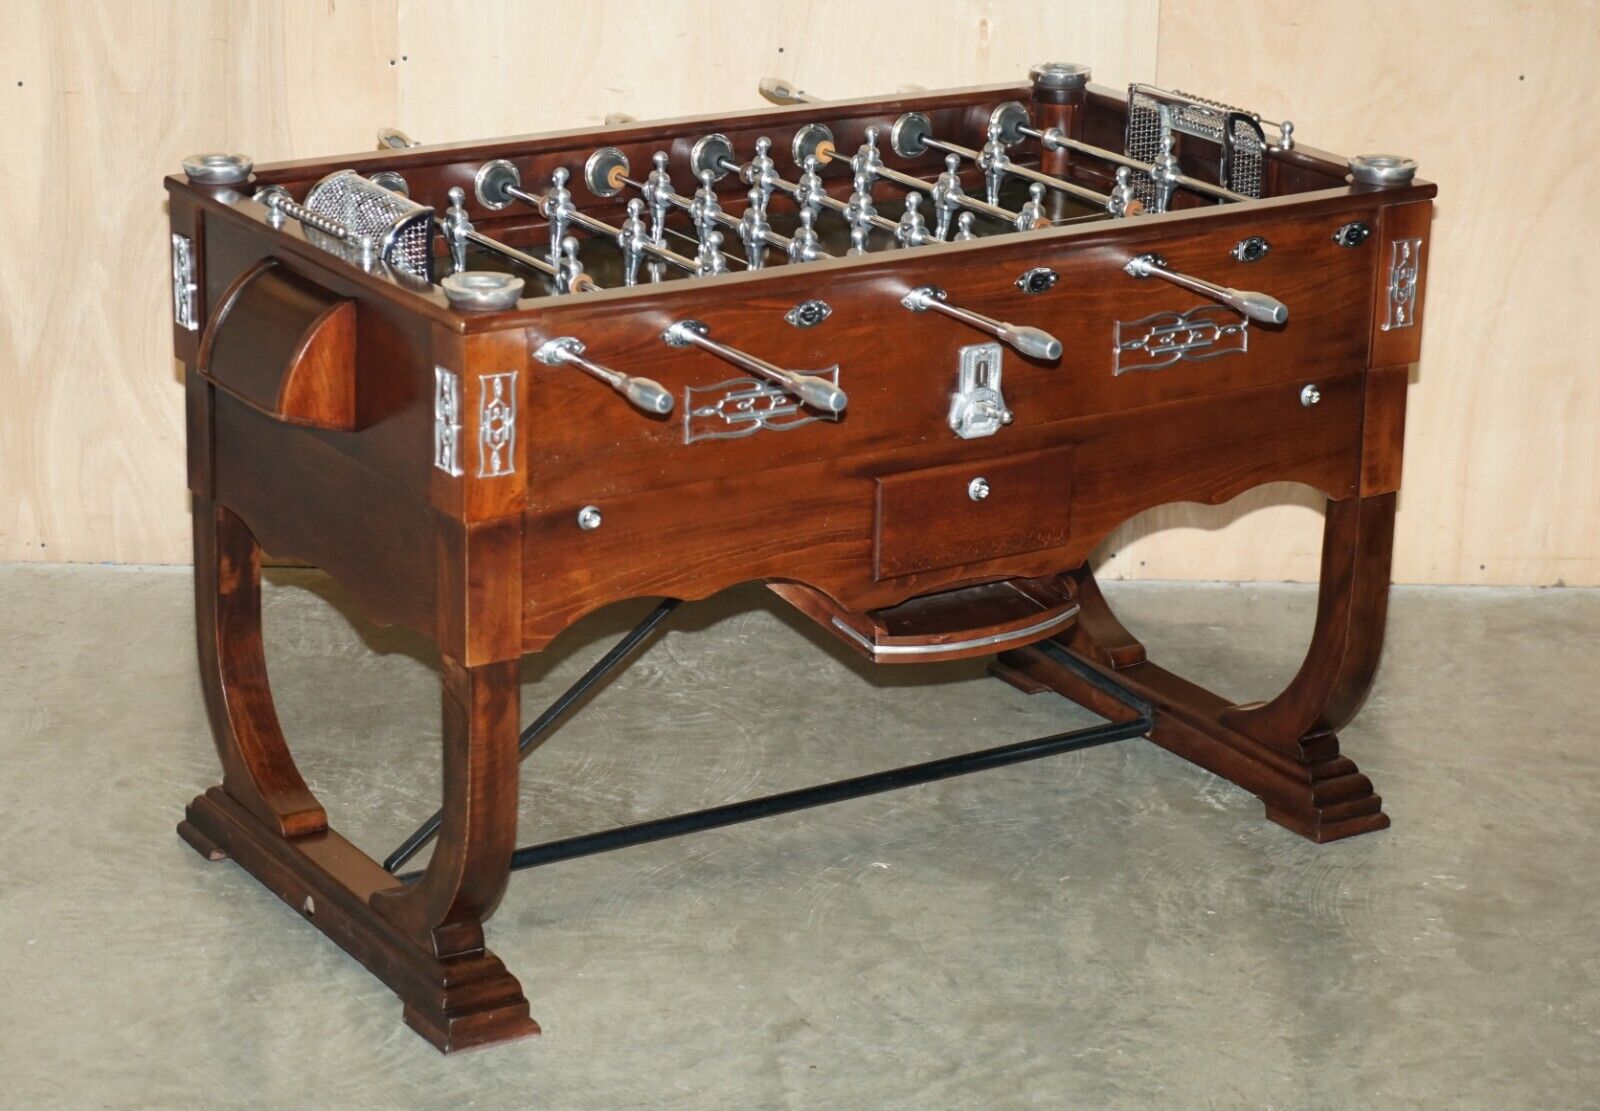 ART DECO BABYFOOT TOULET EST 1857 FOOTBALL OR FOOSBALL TABLE WITH CHROME PLAYERS